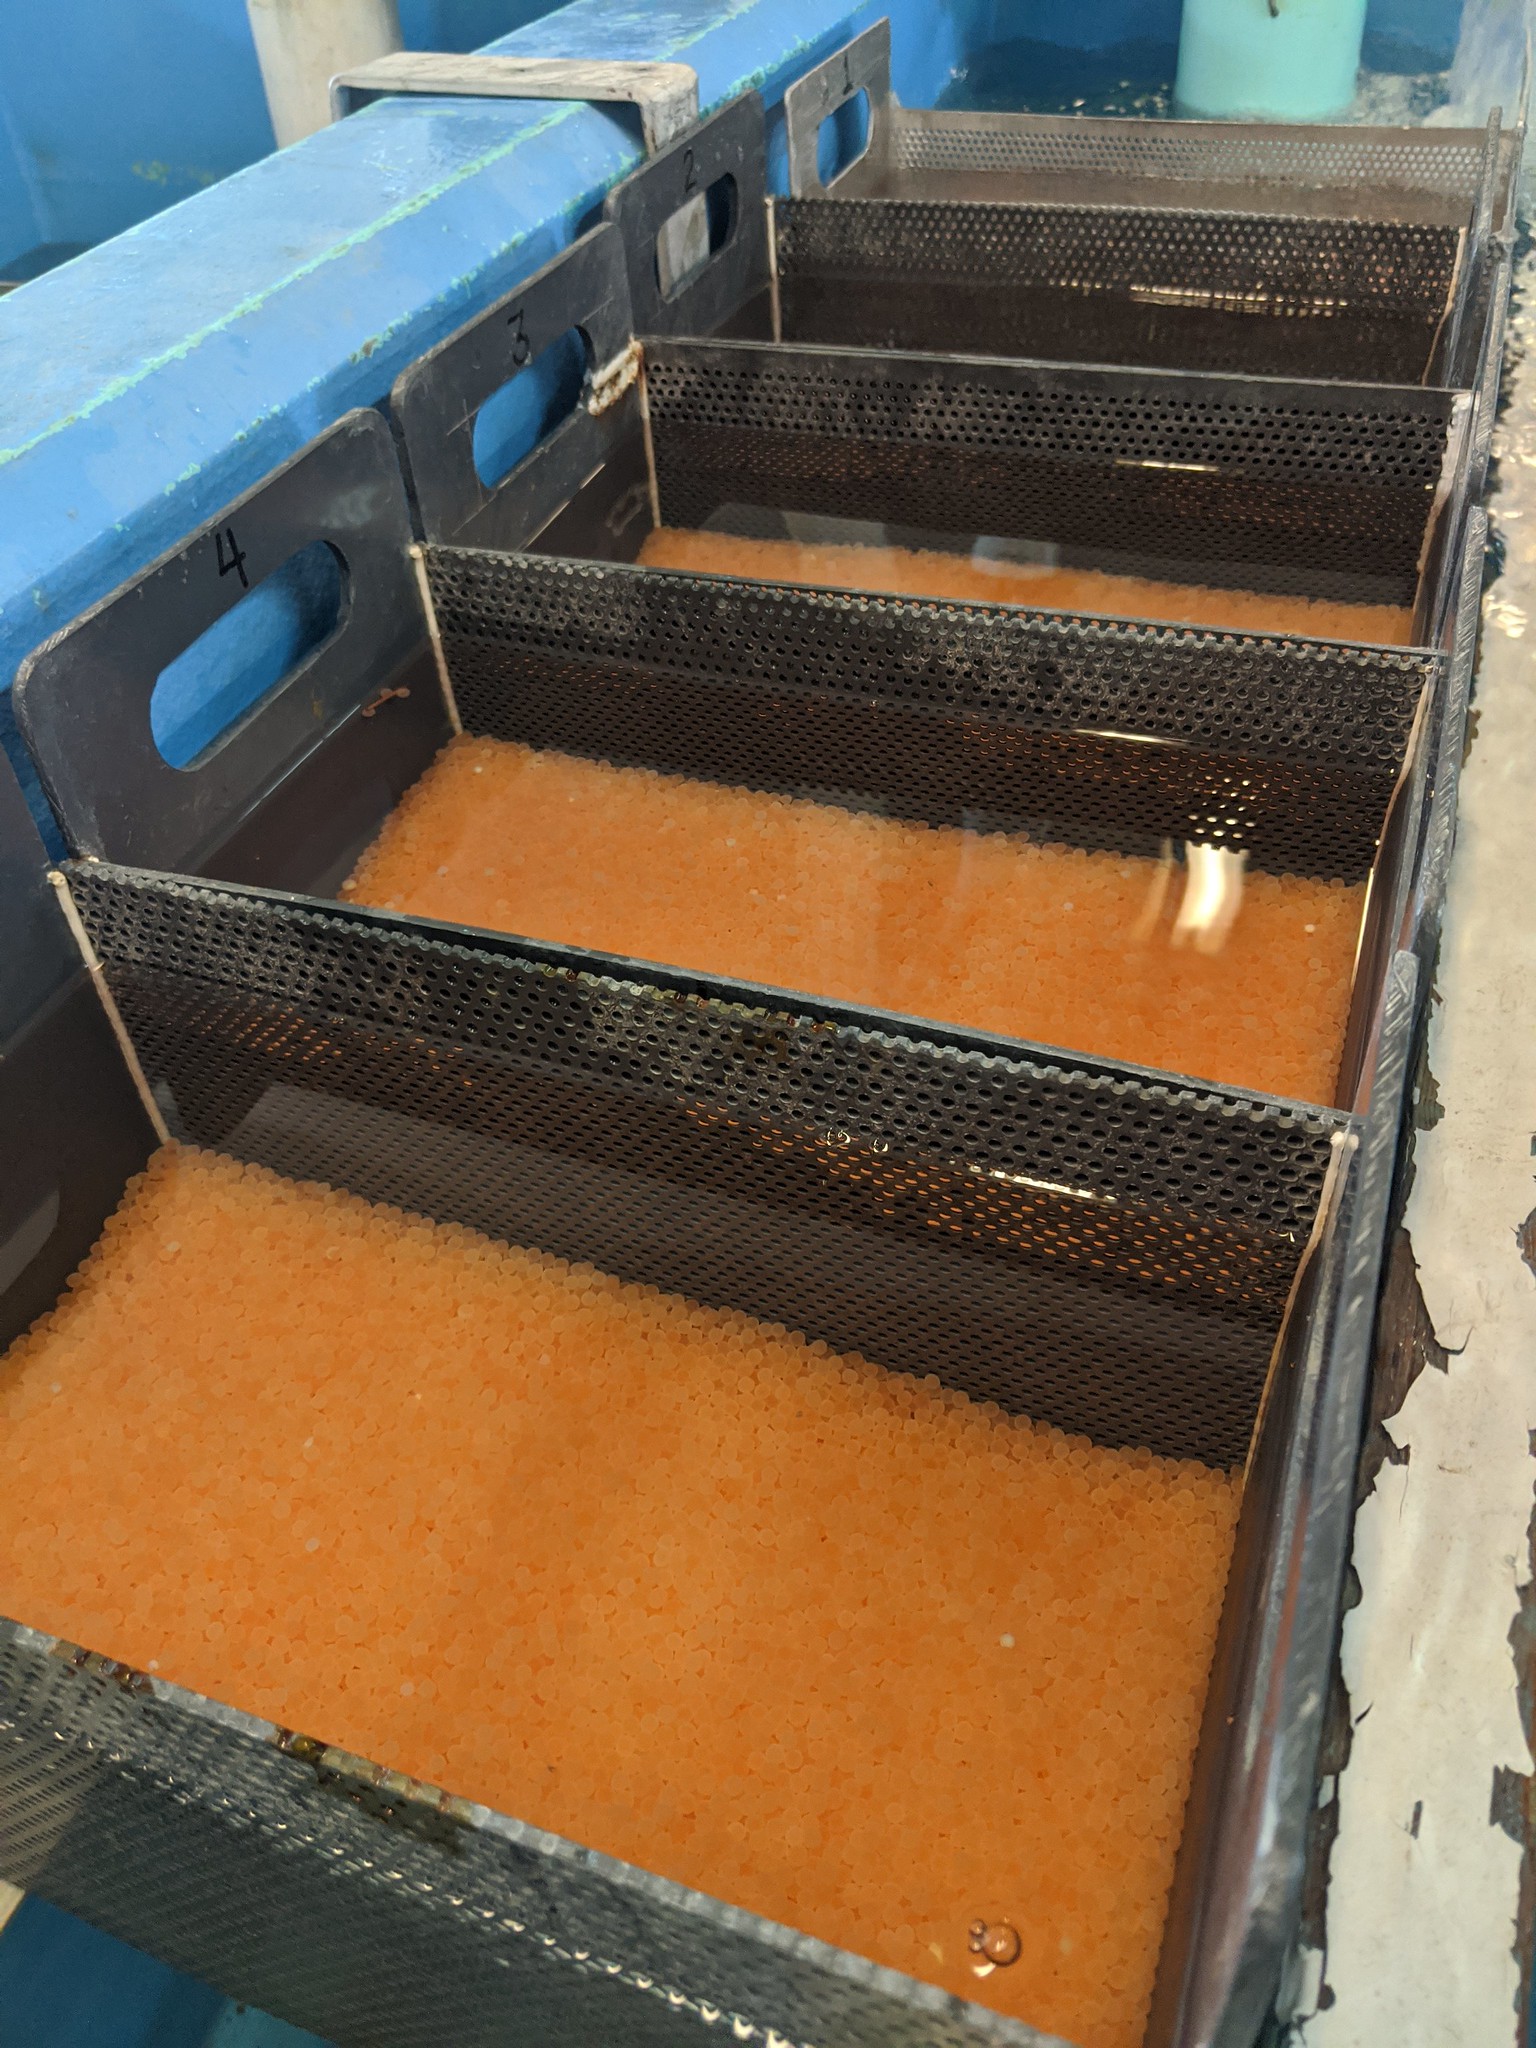 New lake trout eggs